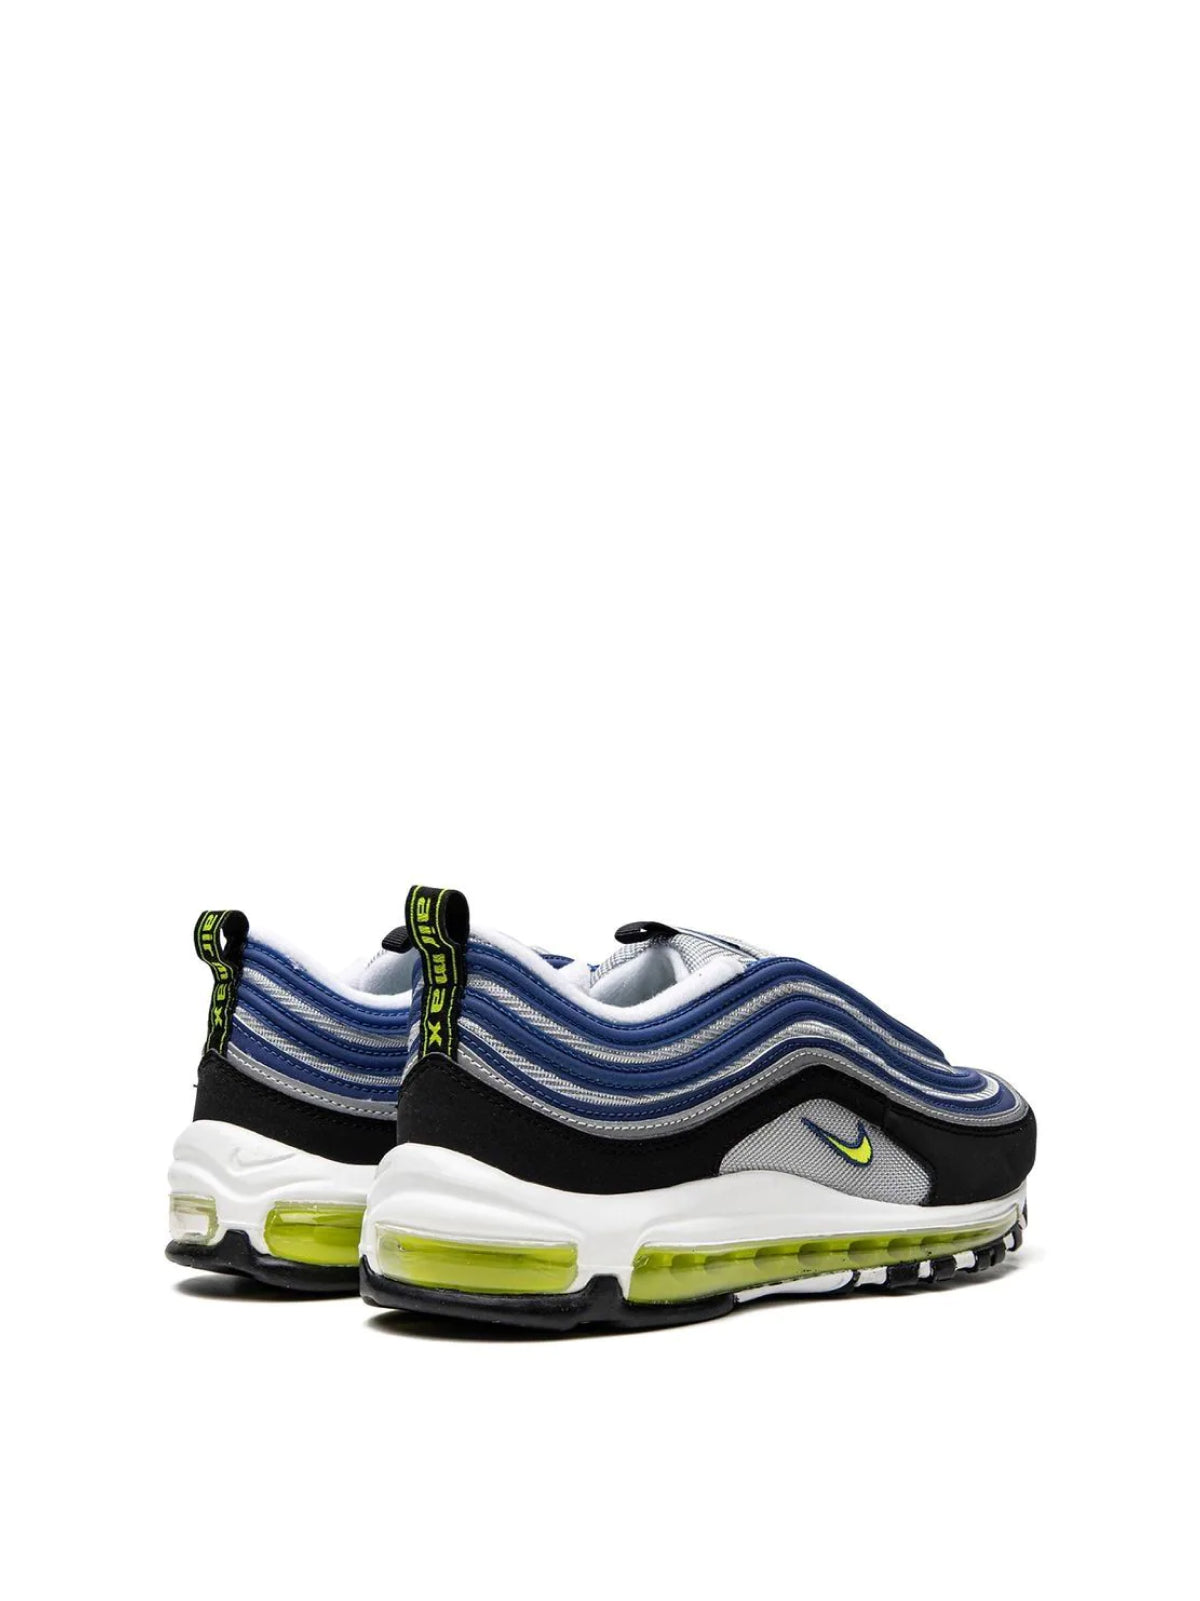 Nike-OUTLET-SALE-Air Max 97 OG Sneakers-ARCHIVIST